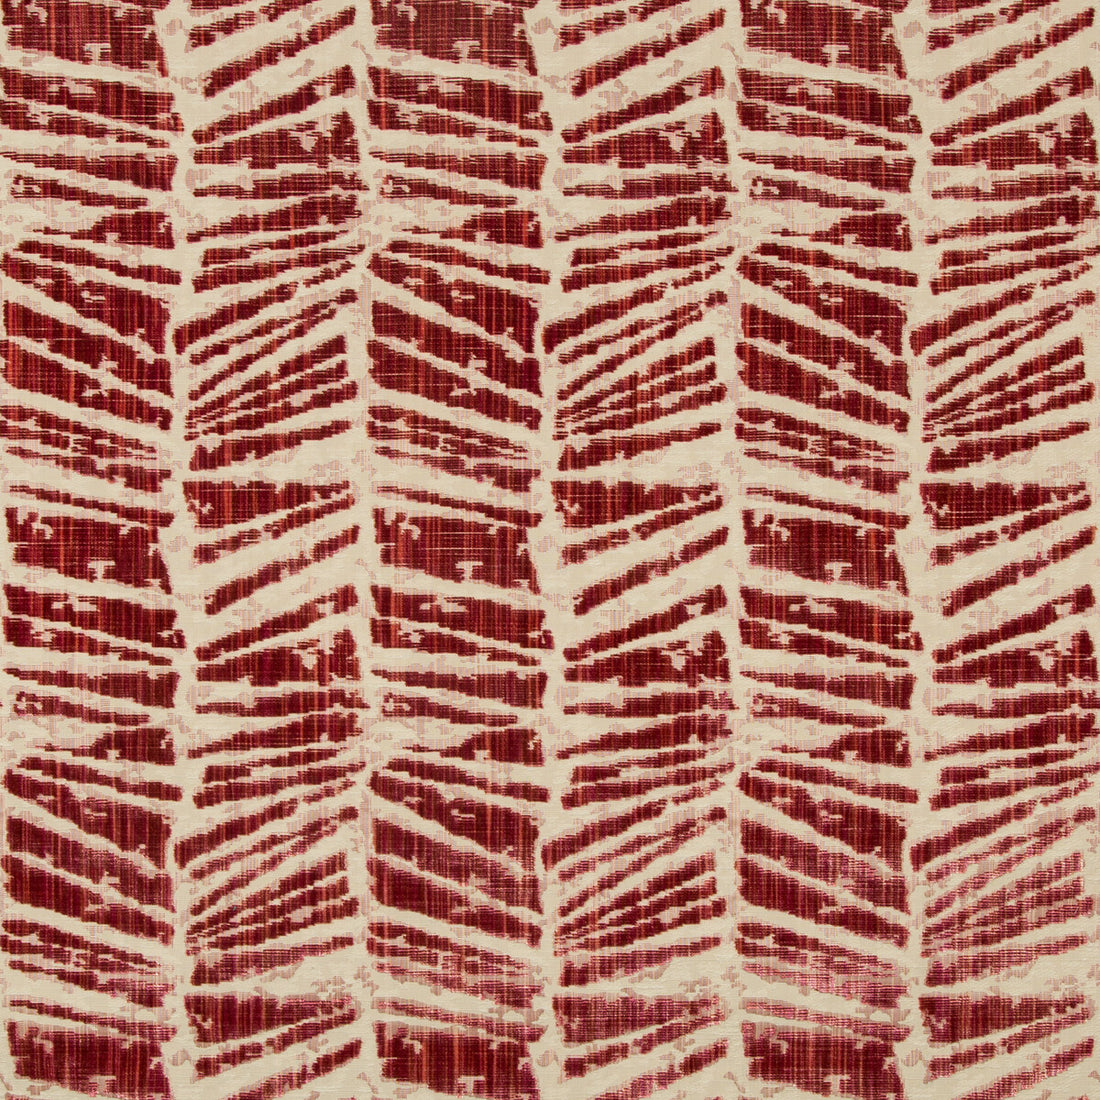 Chaumont Velvet fabric in red color - pattern 8020114.19.0 - by Brunschwig &amp; Fils in the Chaumont Velvets collection